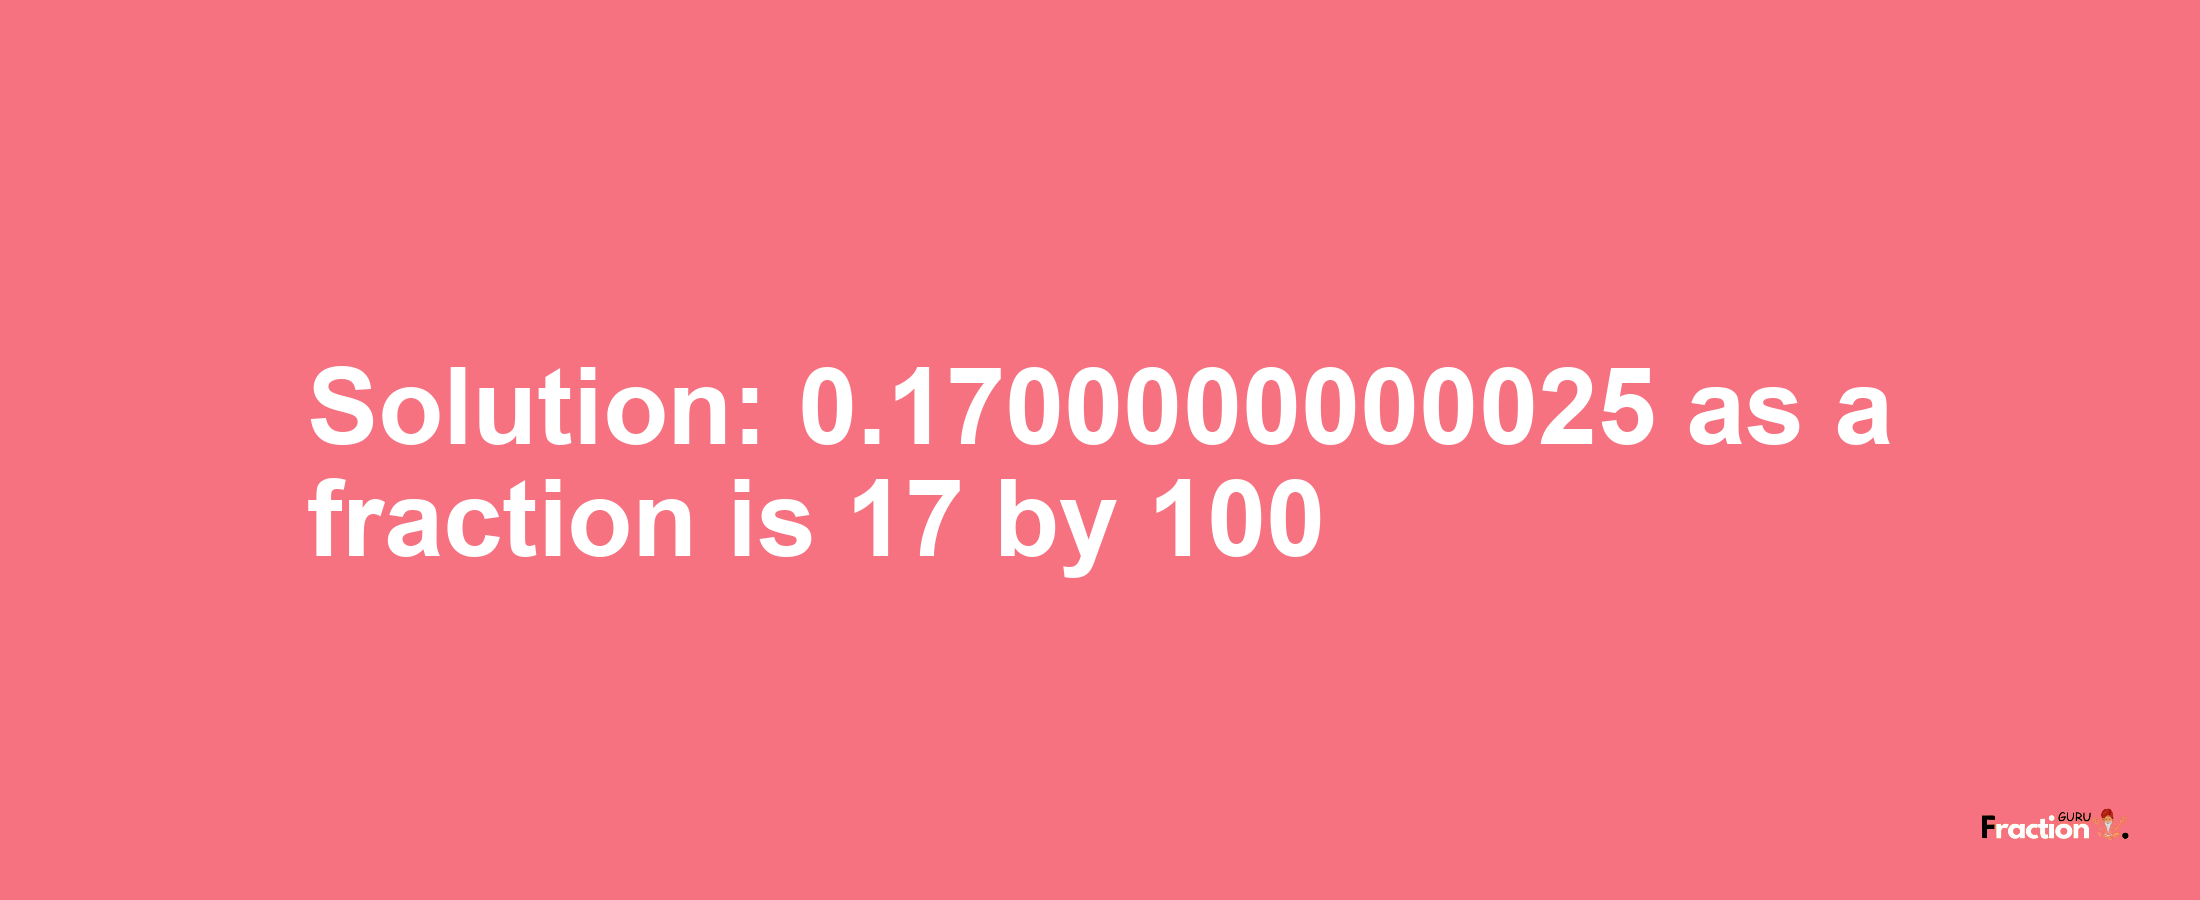 Solution:0.1700000000025 as a fraction is 17/100